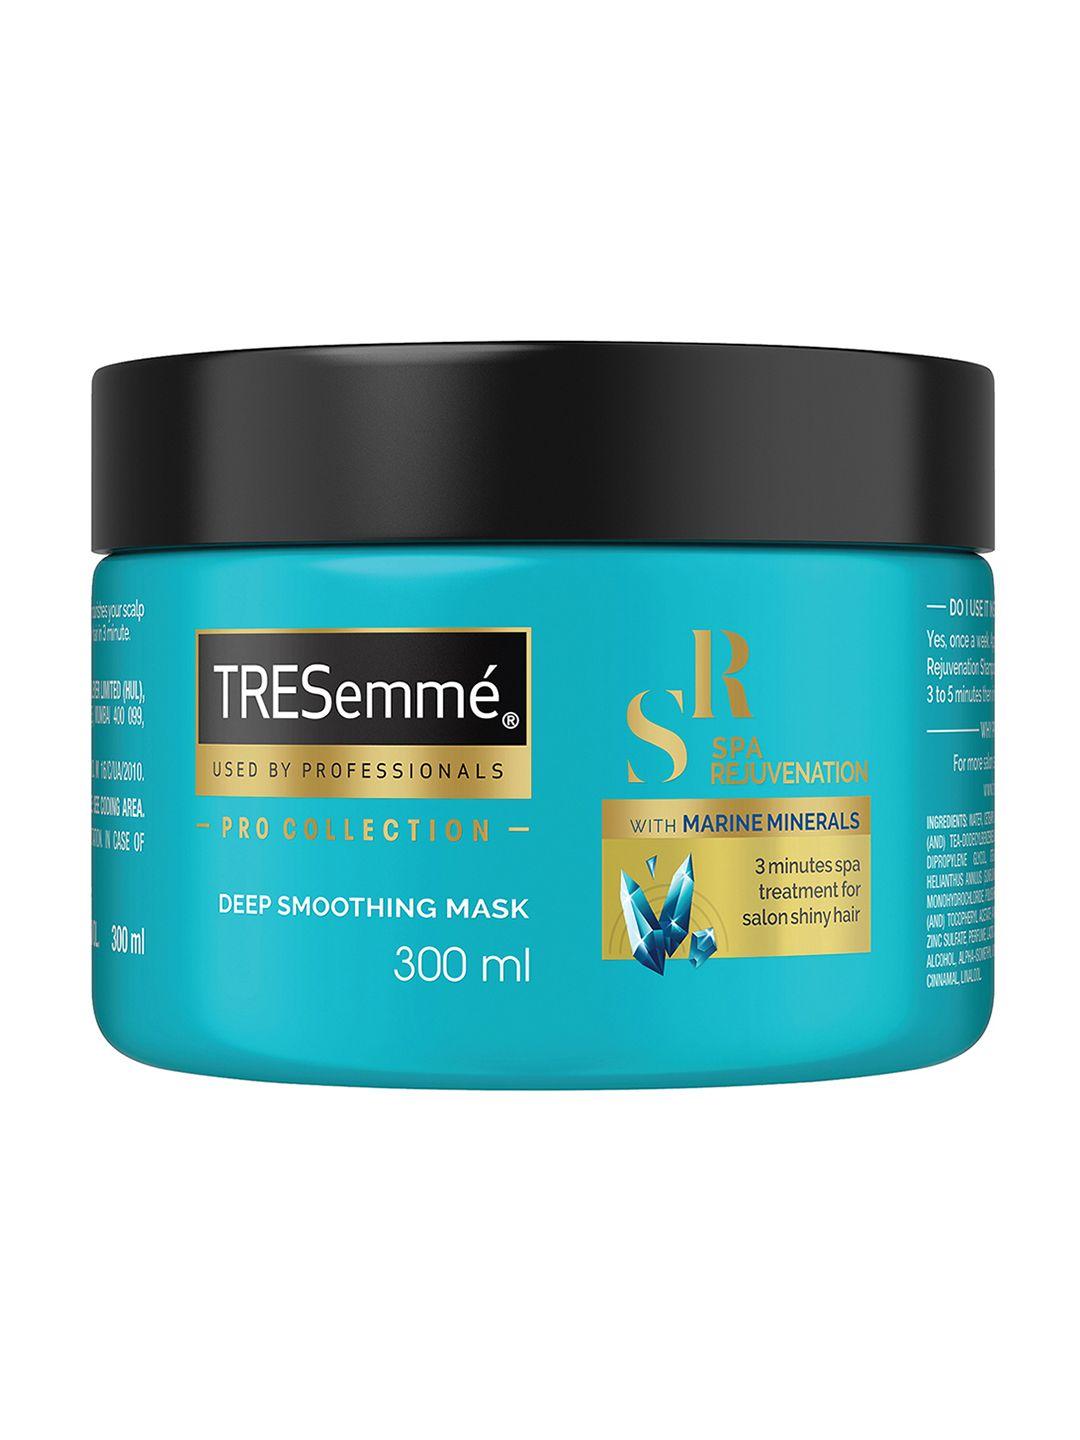 tresemme pro collection spa rejuvenation deep smoothing mask - 300 ml